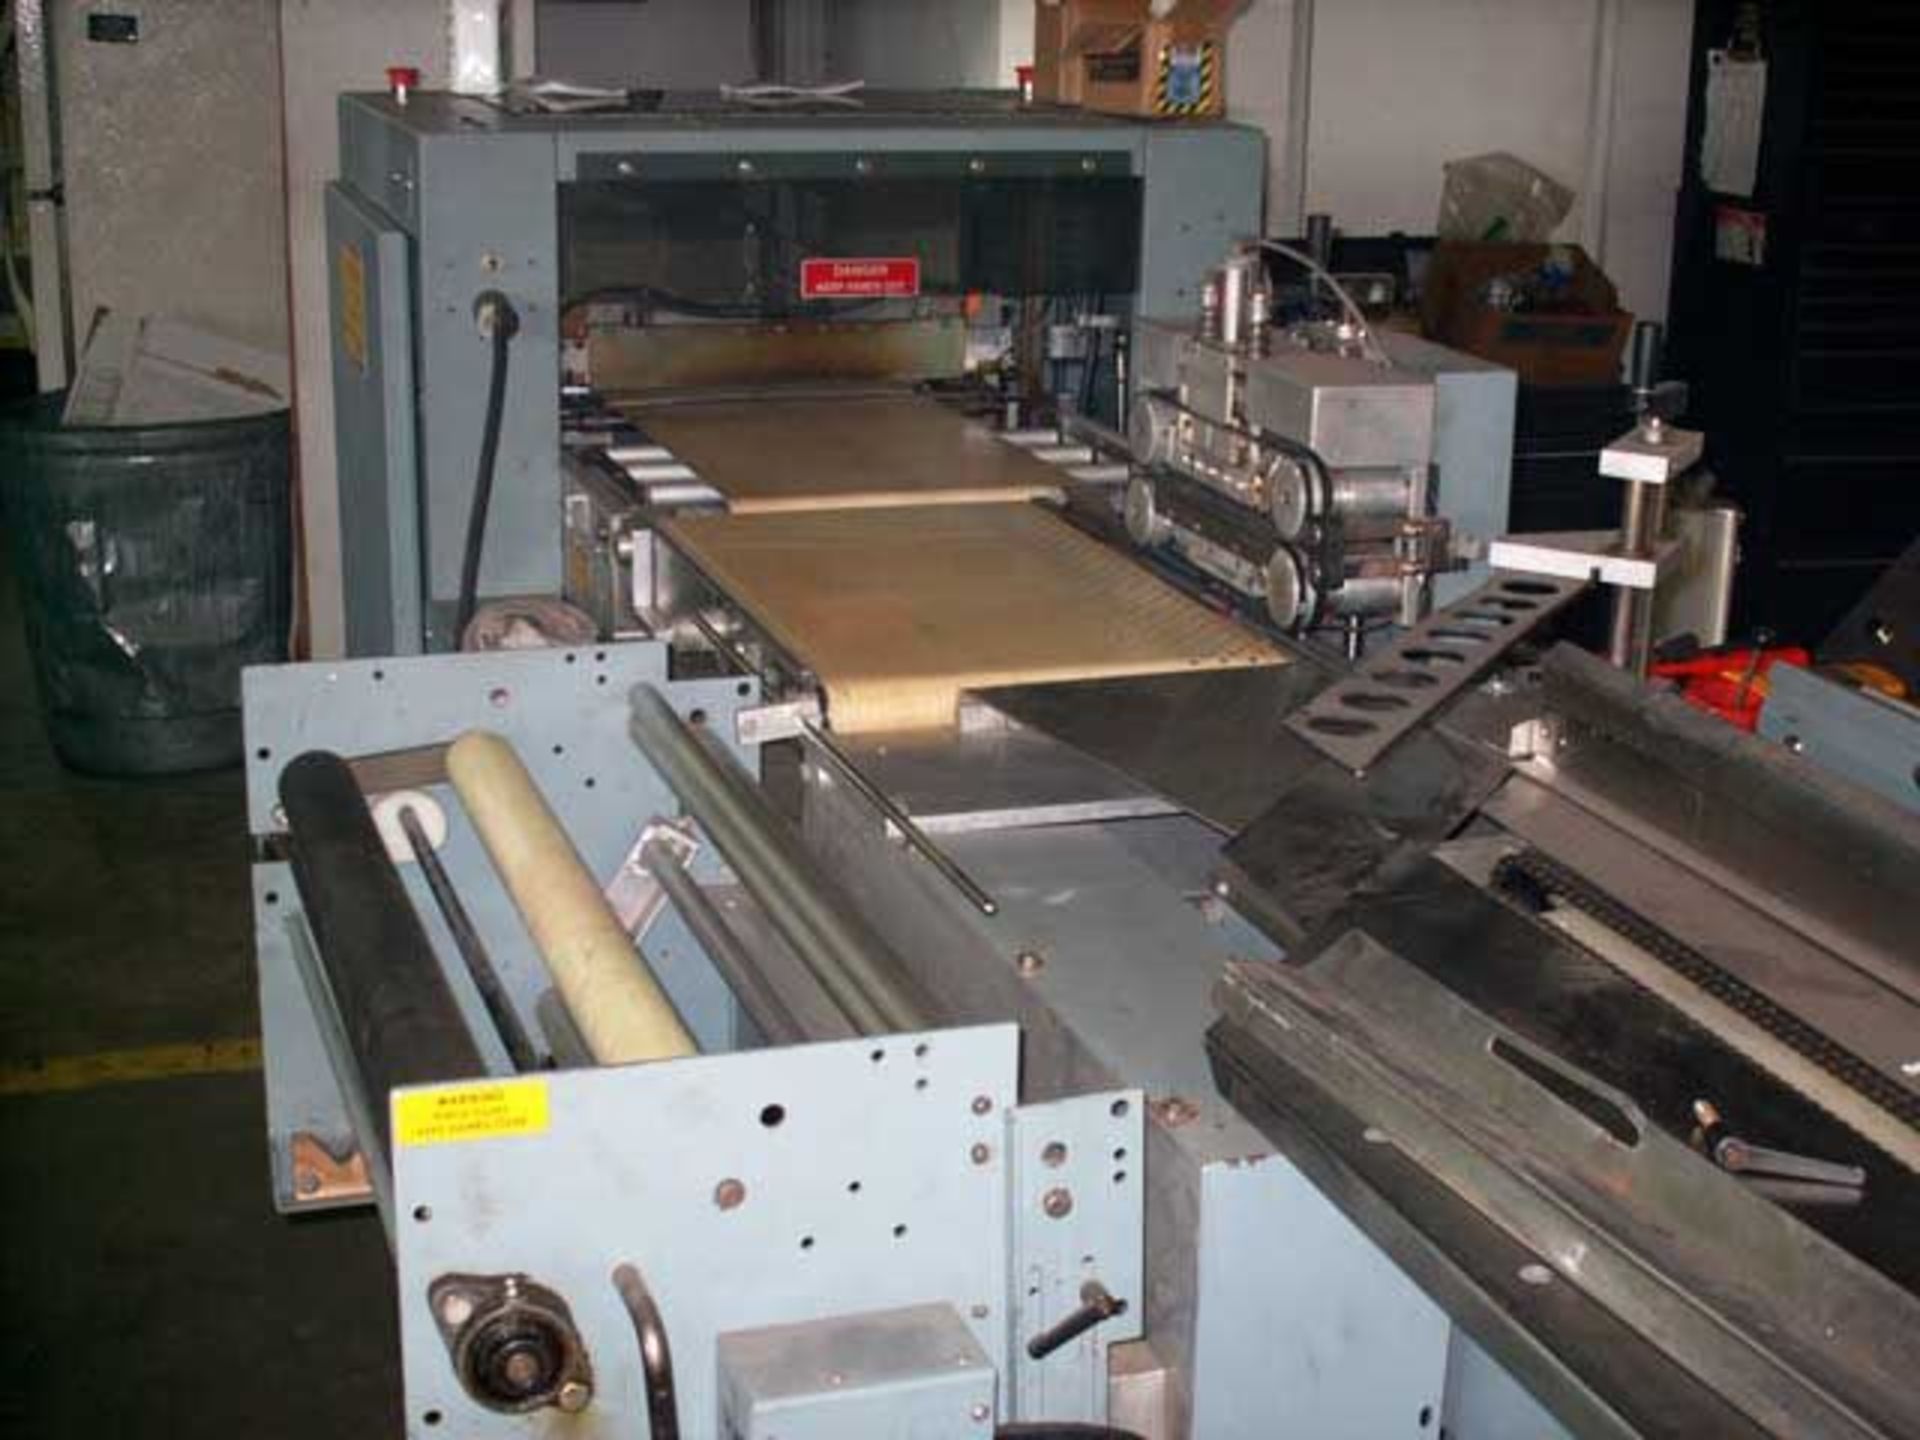 SHANKLIN MODEL HS-3 SIDE SEAM SHRINK WRAPPER WITH FLIGHTED INFEED, S/N H9632 Loading Fee: $200 Note: